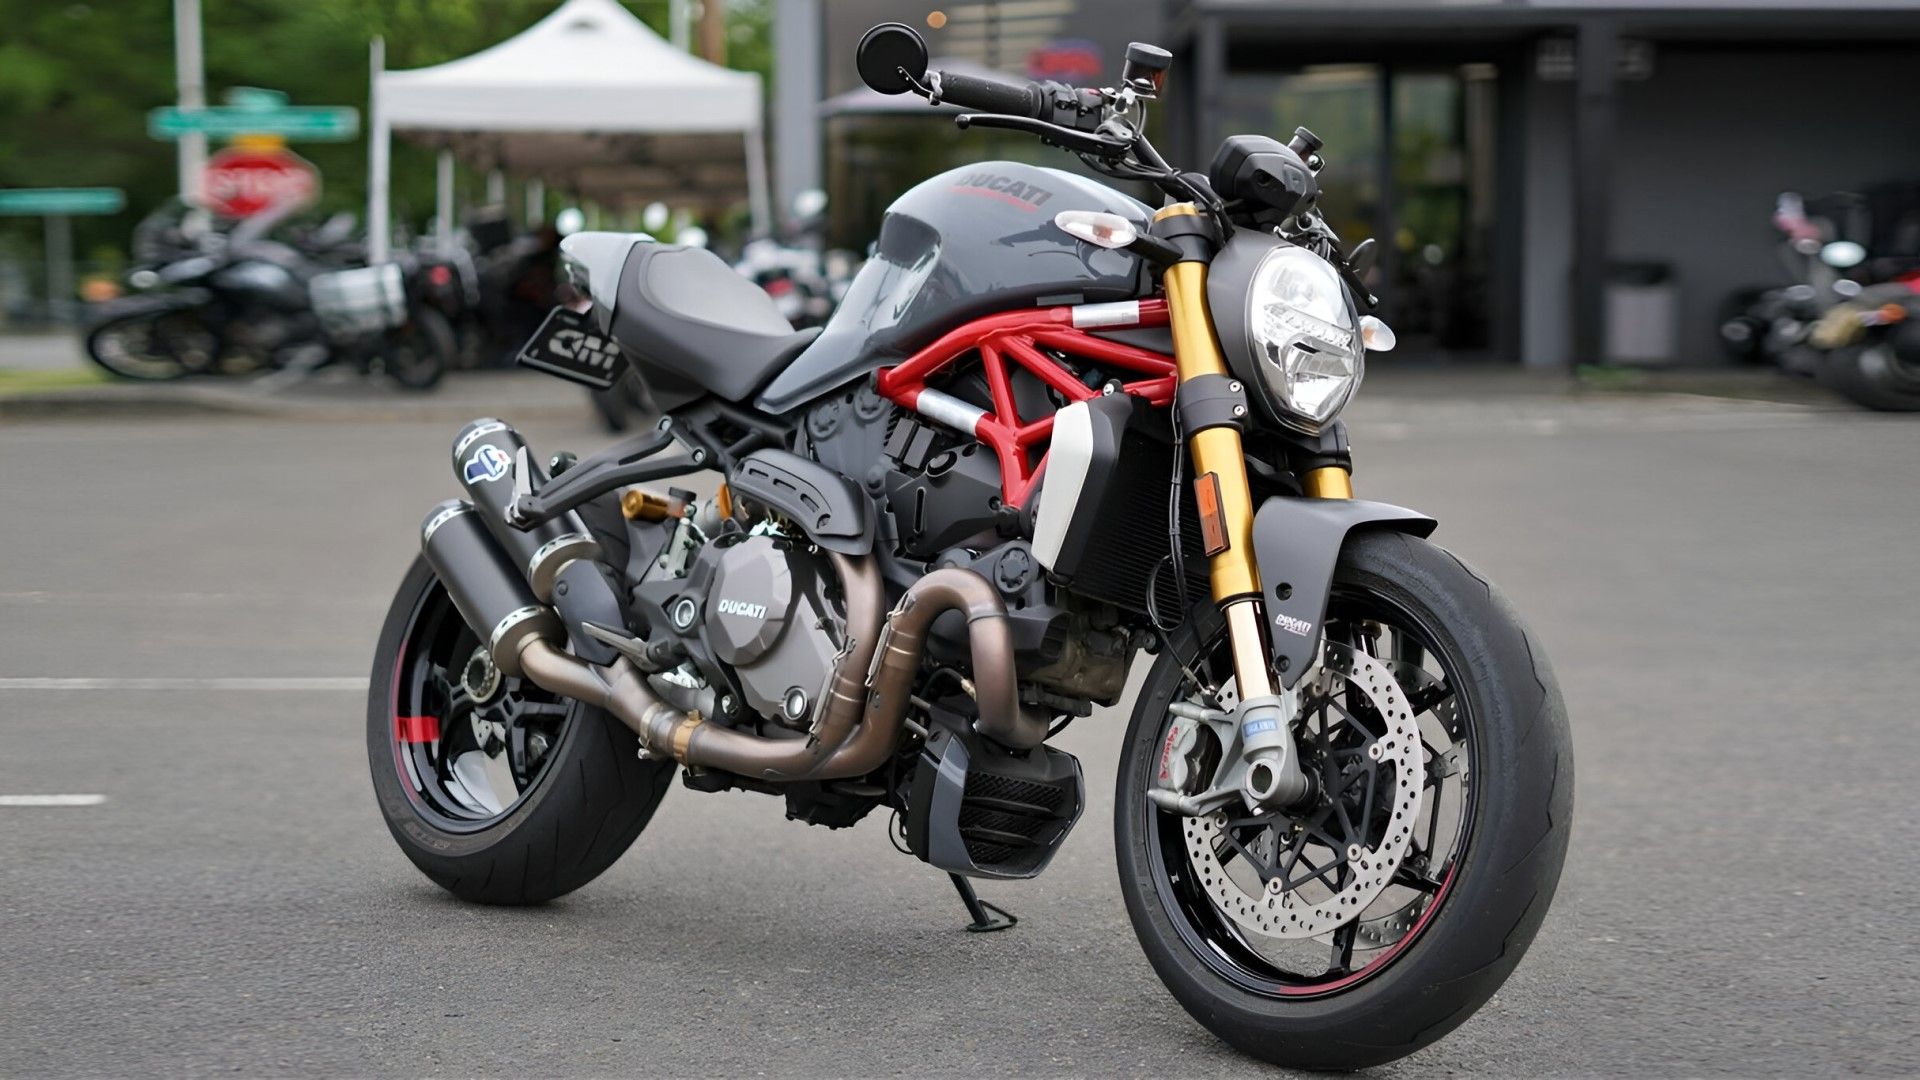 2020 Ducati Monster 1200 front third quarter view